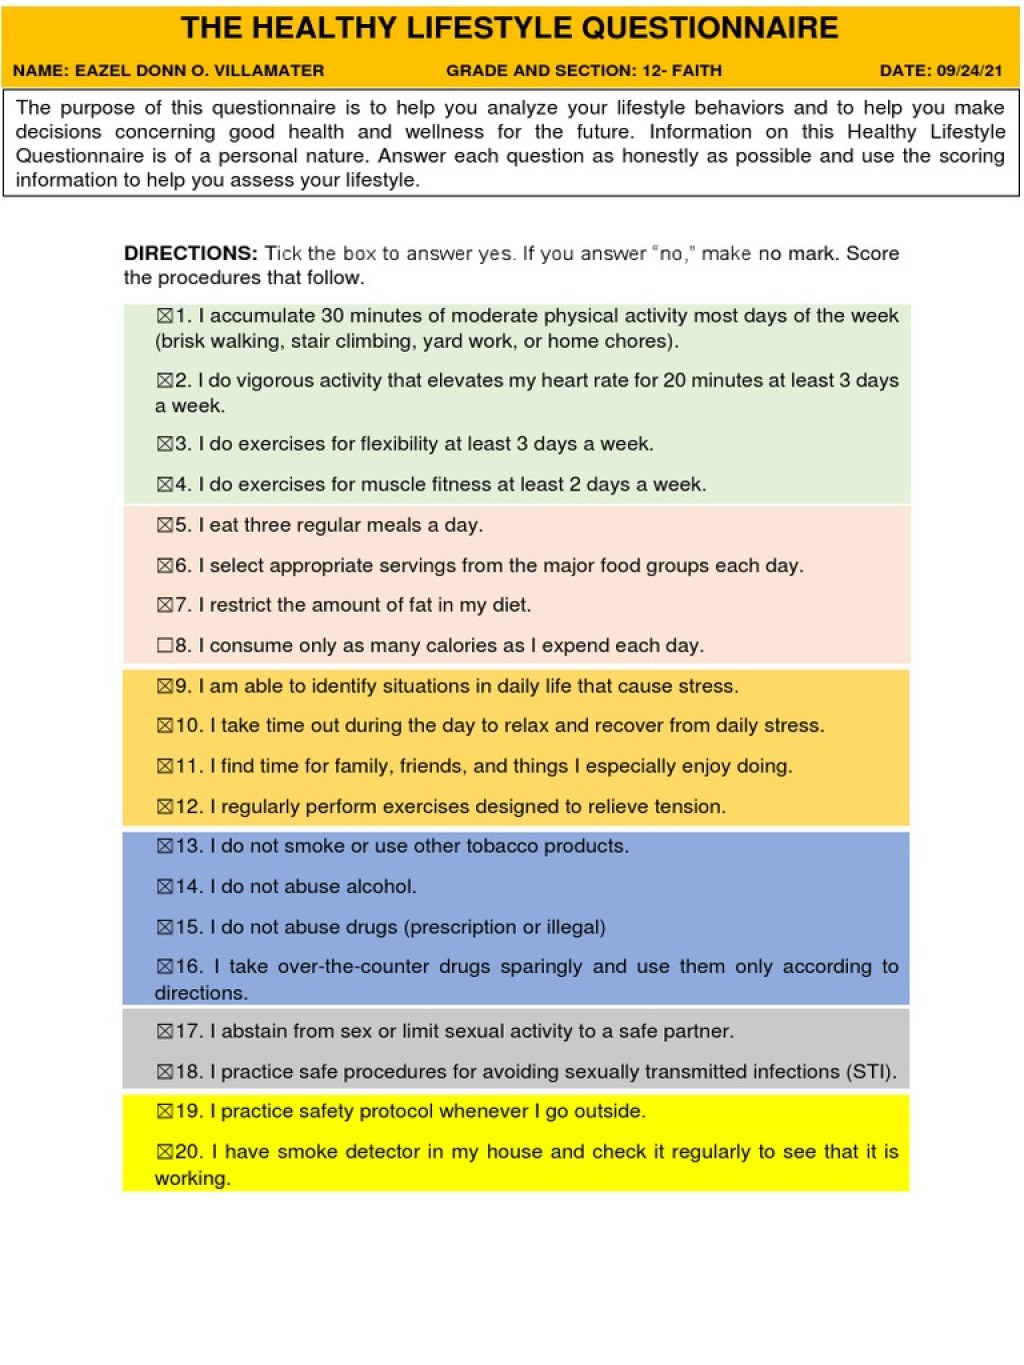 Picture of: The Healthy Lifestyle Questionnaire  PDF  Health Care  Health